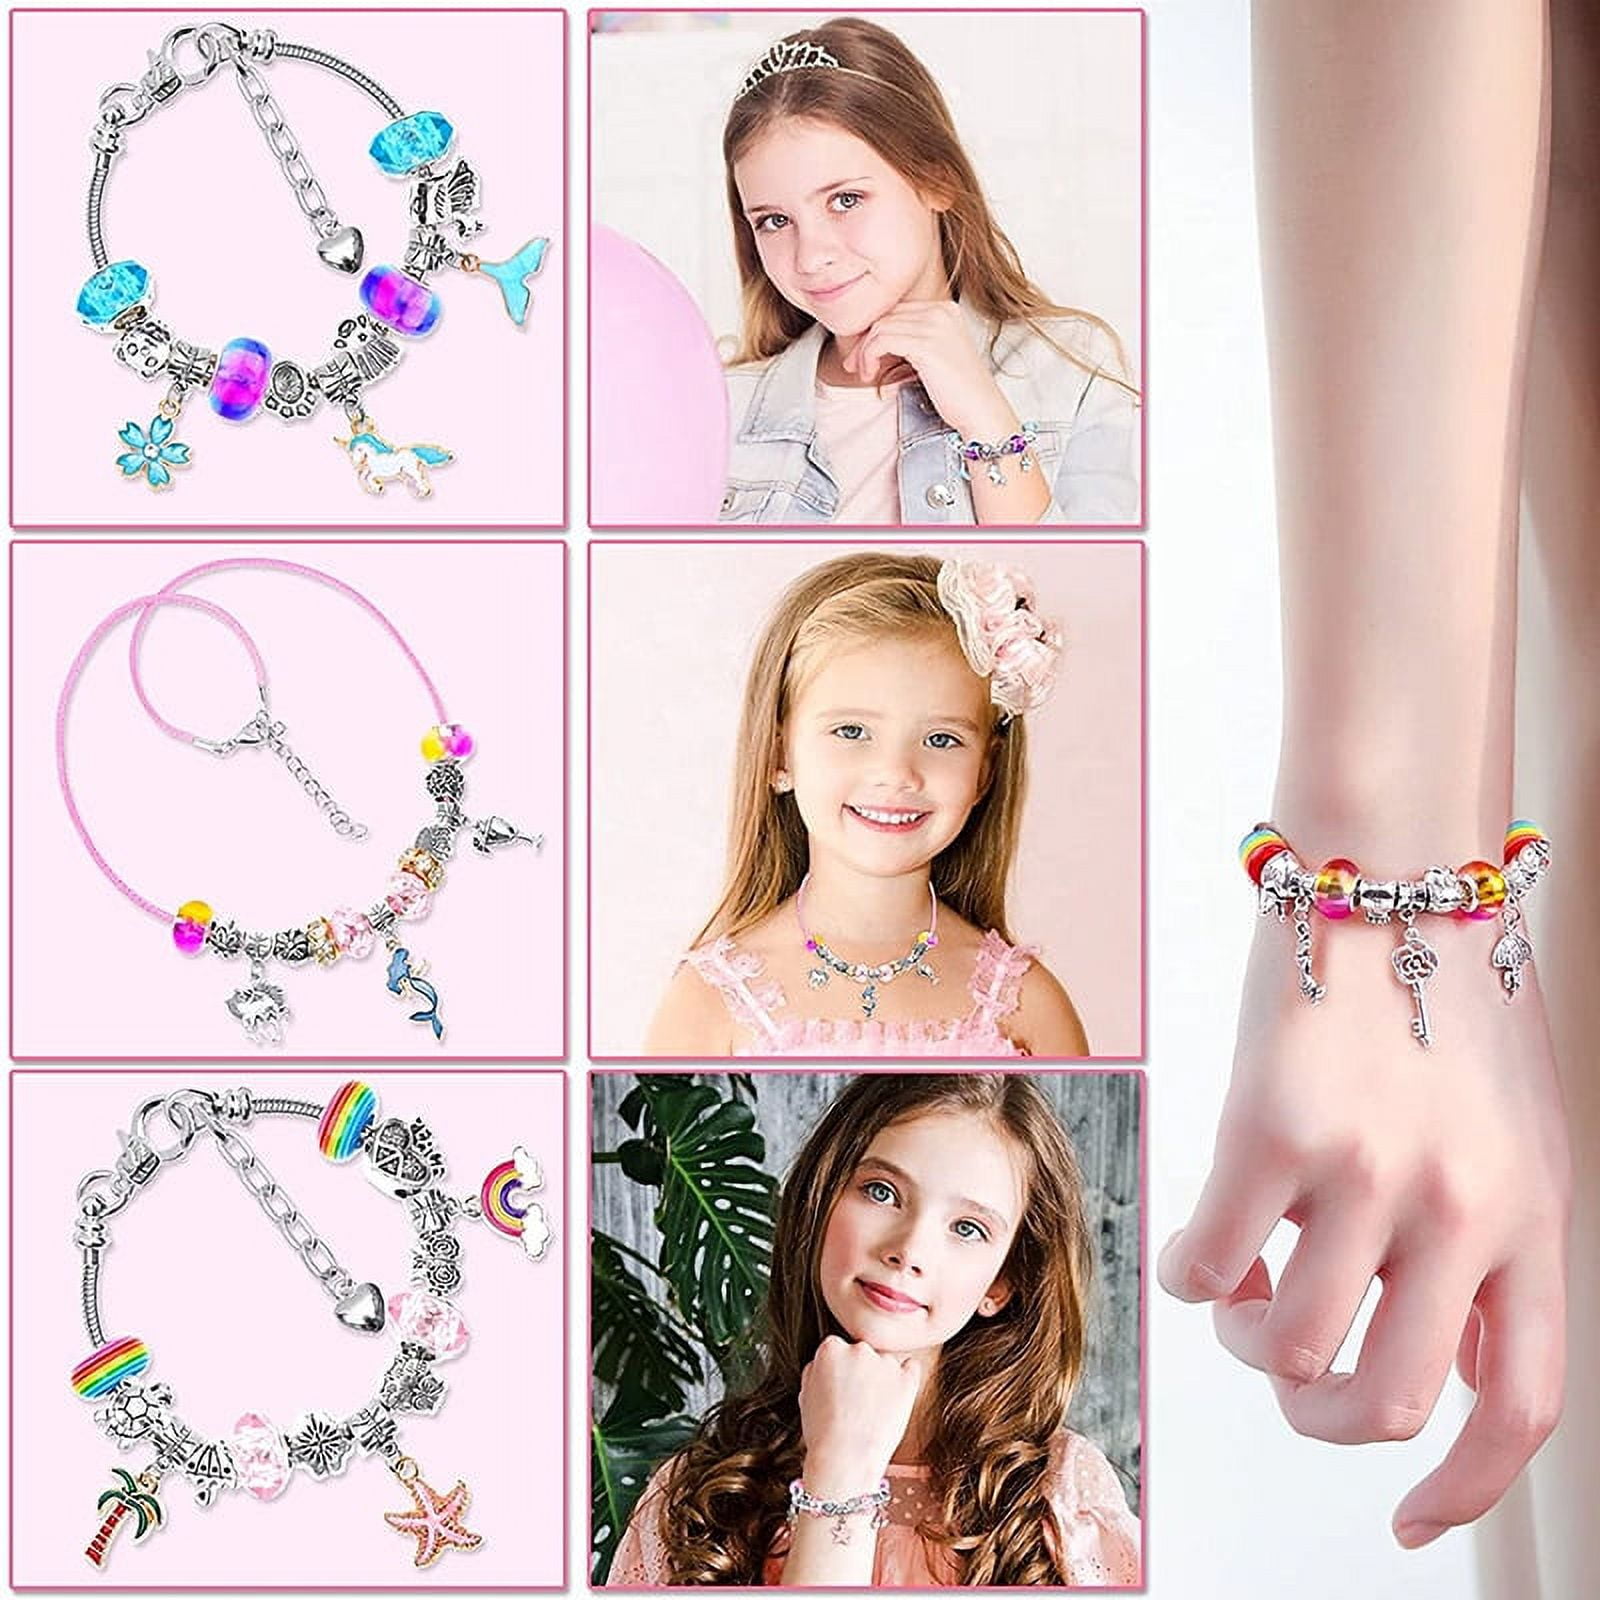 64 Pieces Charm Bracelet Making Kit Including Jewelry Beads Snake Chains,  DIY Craft for Girls, Jewelry Christmas Gift Set for Arts and Crafts for  Girls Ages 8-12 -Purple 